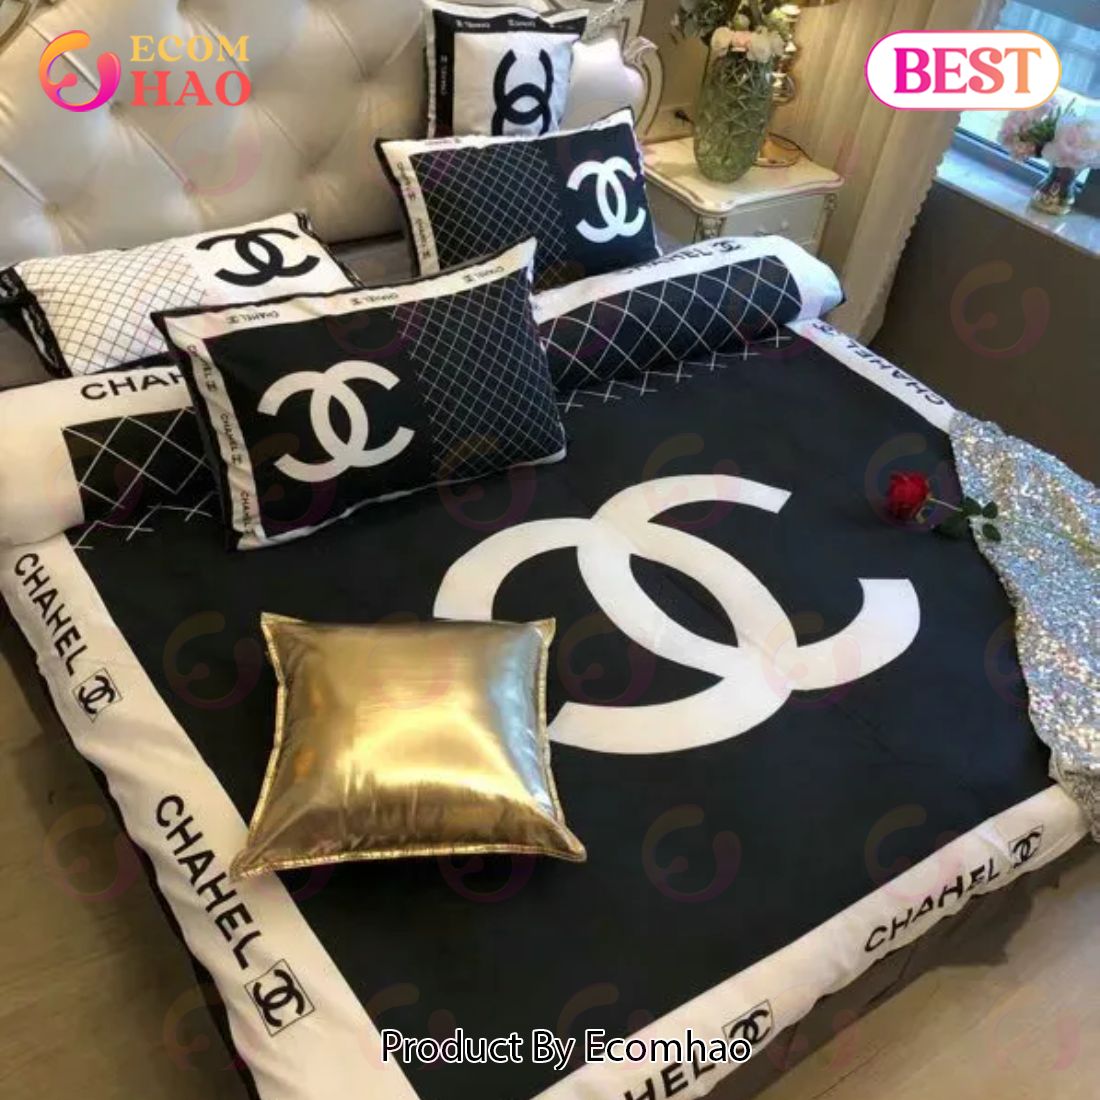 Chanel Bedding 3D Printed New Bedding Sets Quilt Sets Duvet Cover Luxury Brand Bedding Decor Bedroom Sets Best Luxury Bed Sets Gift Thankgivings And Christmas